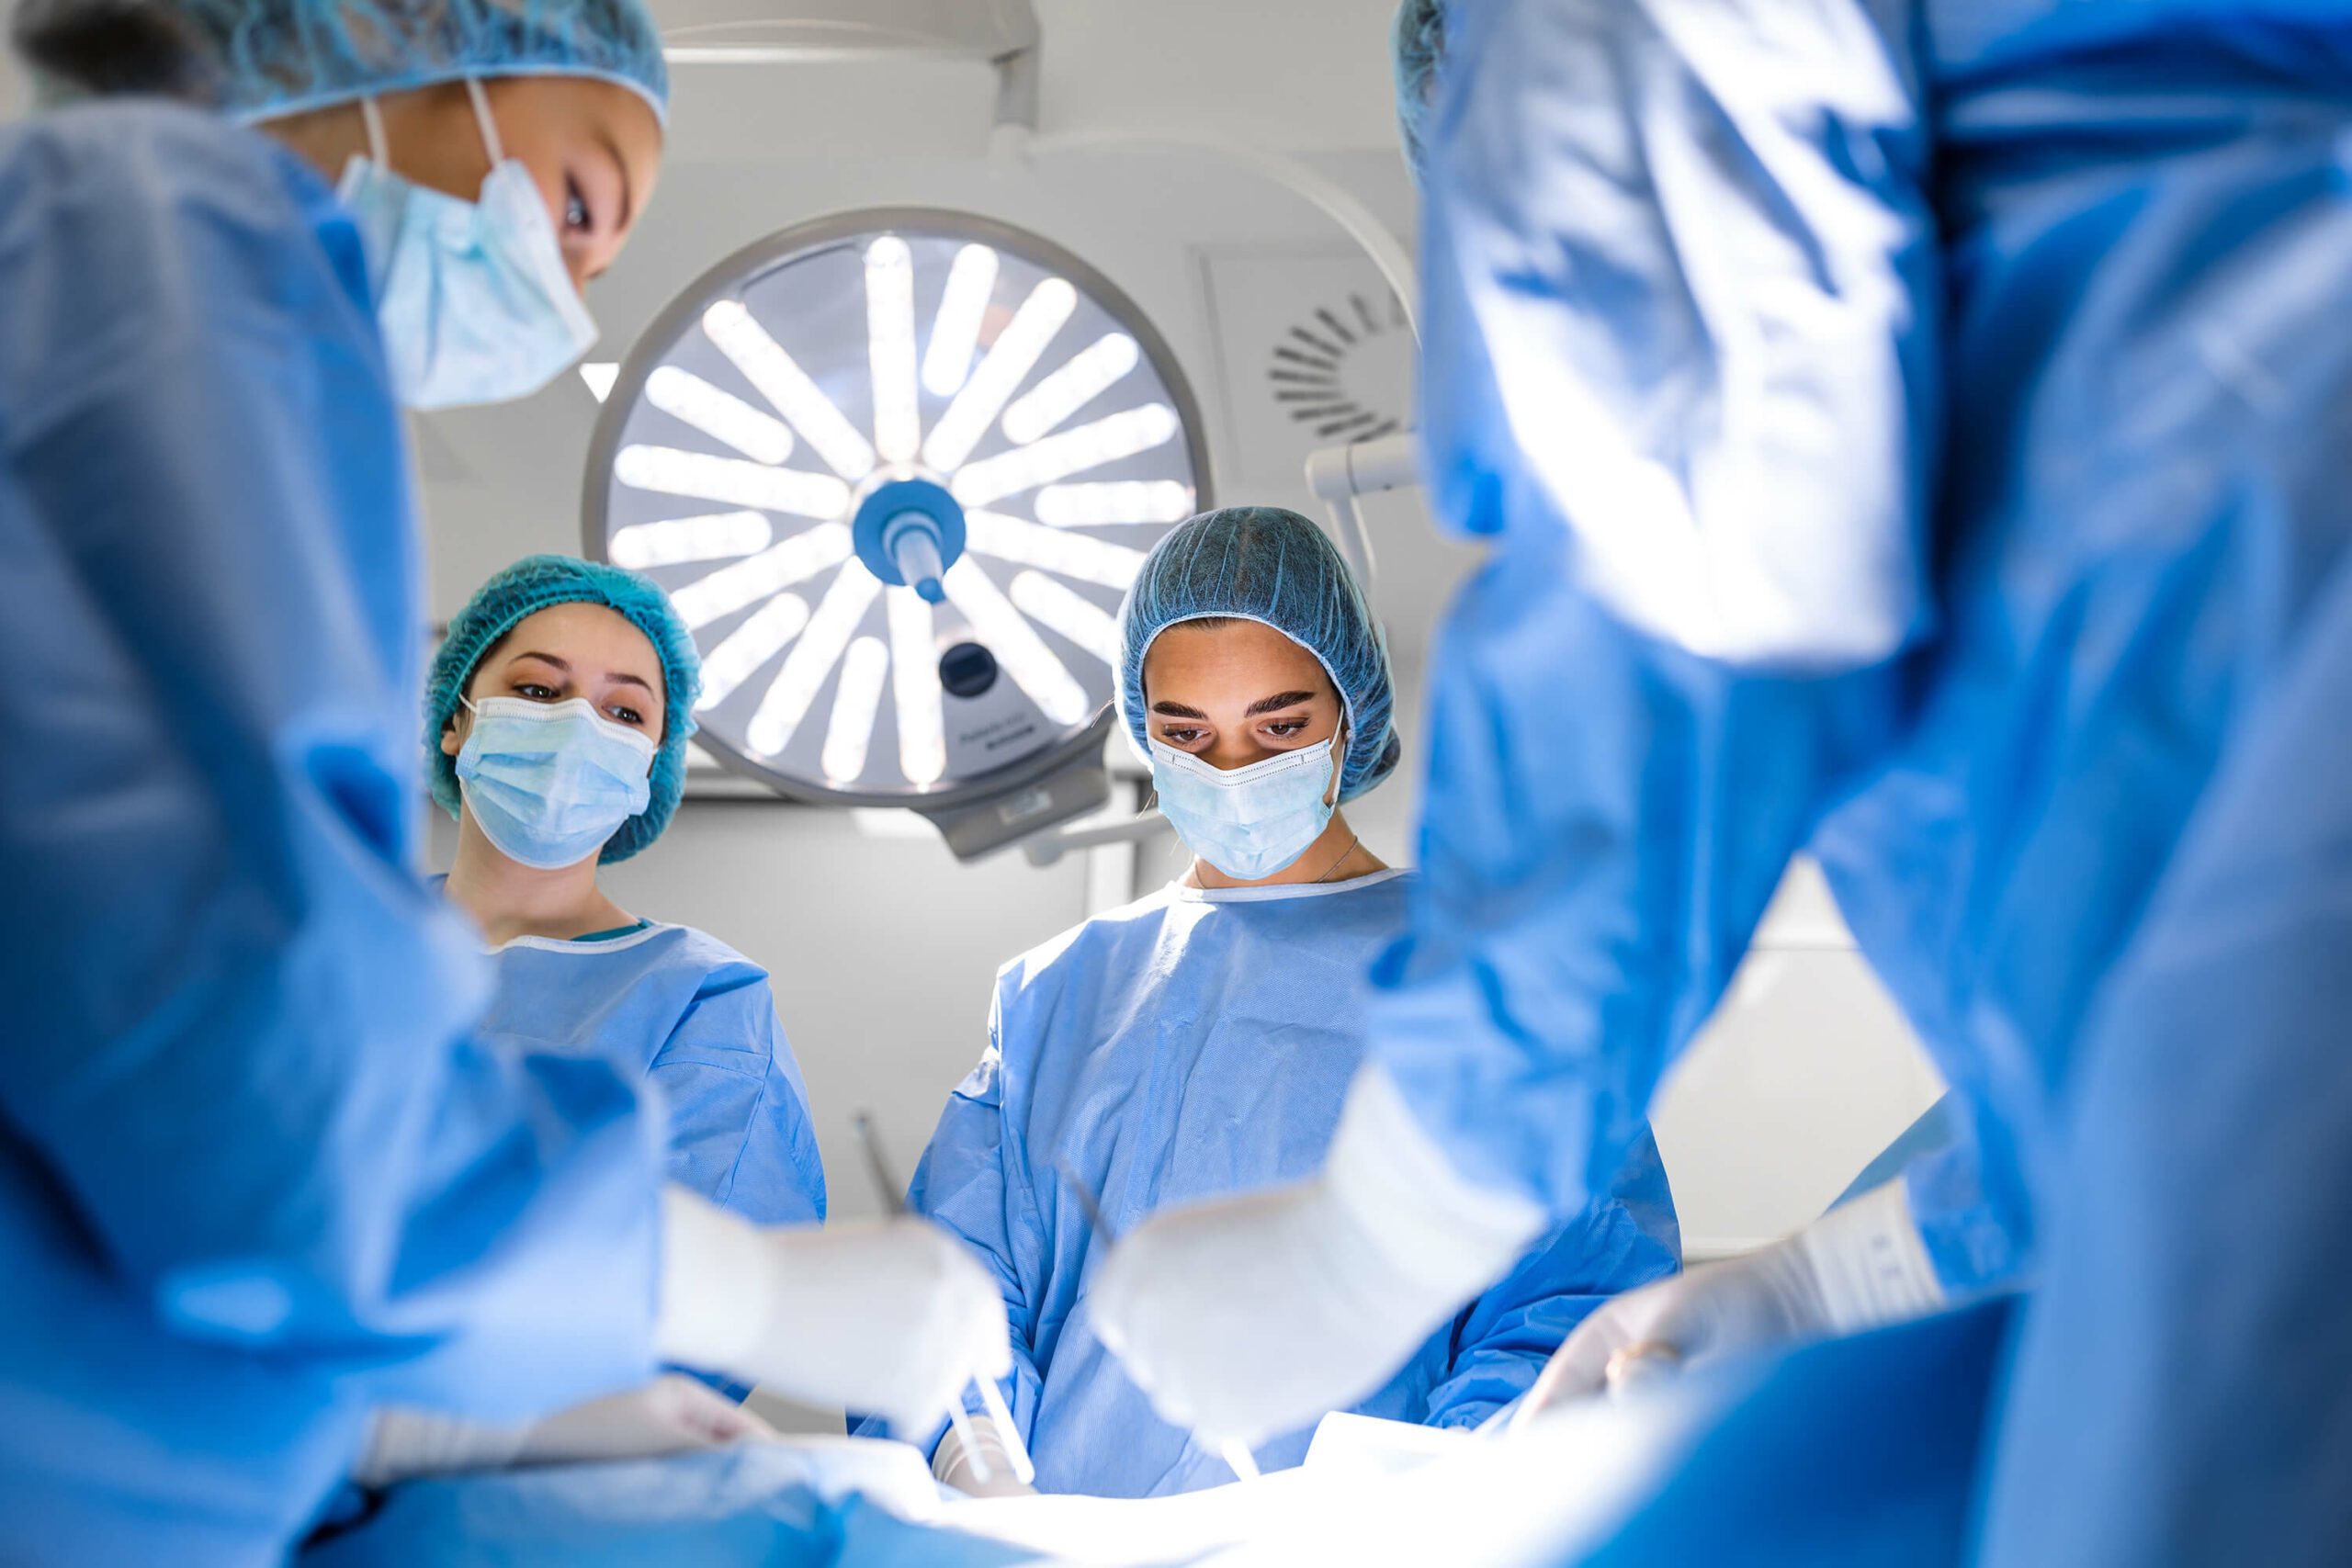 Anesthesia in Plastic Surgery Types and Safety Explained